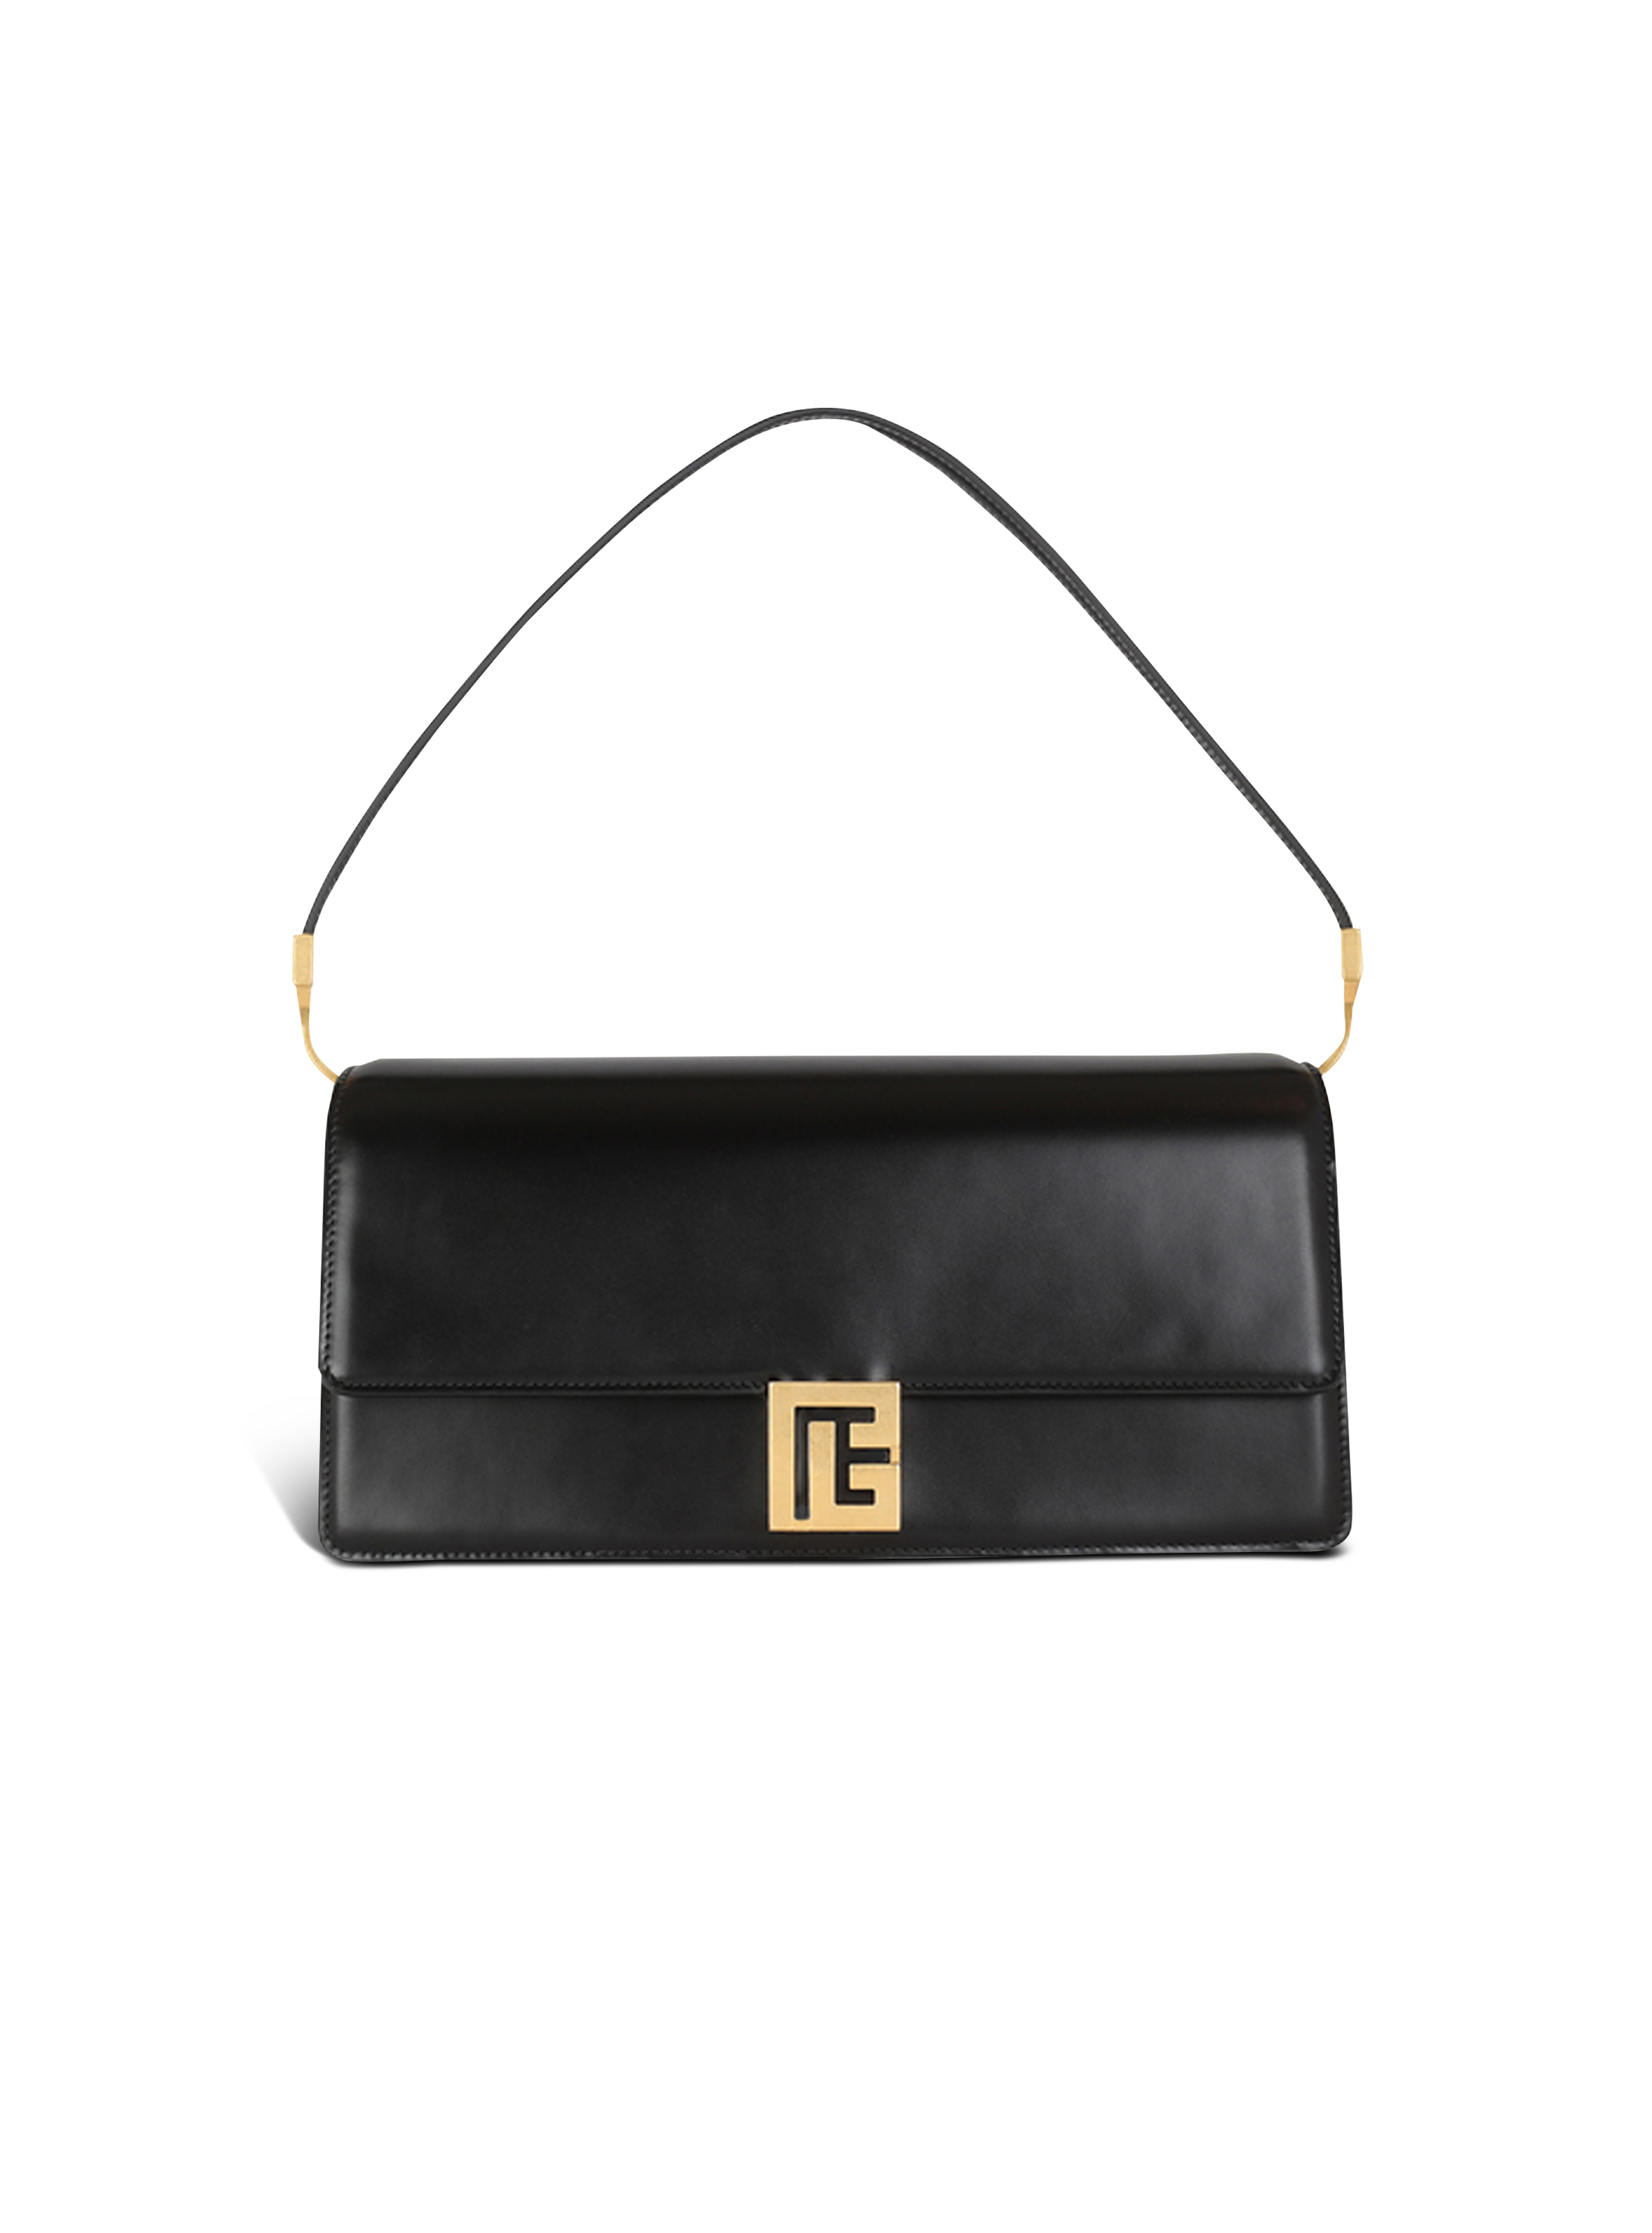 Shiny smooth leather Ely clutch bag, black